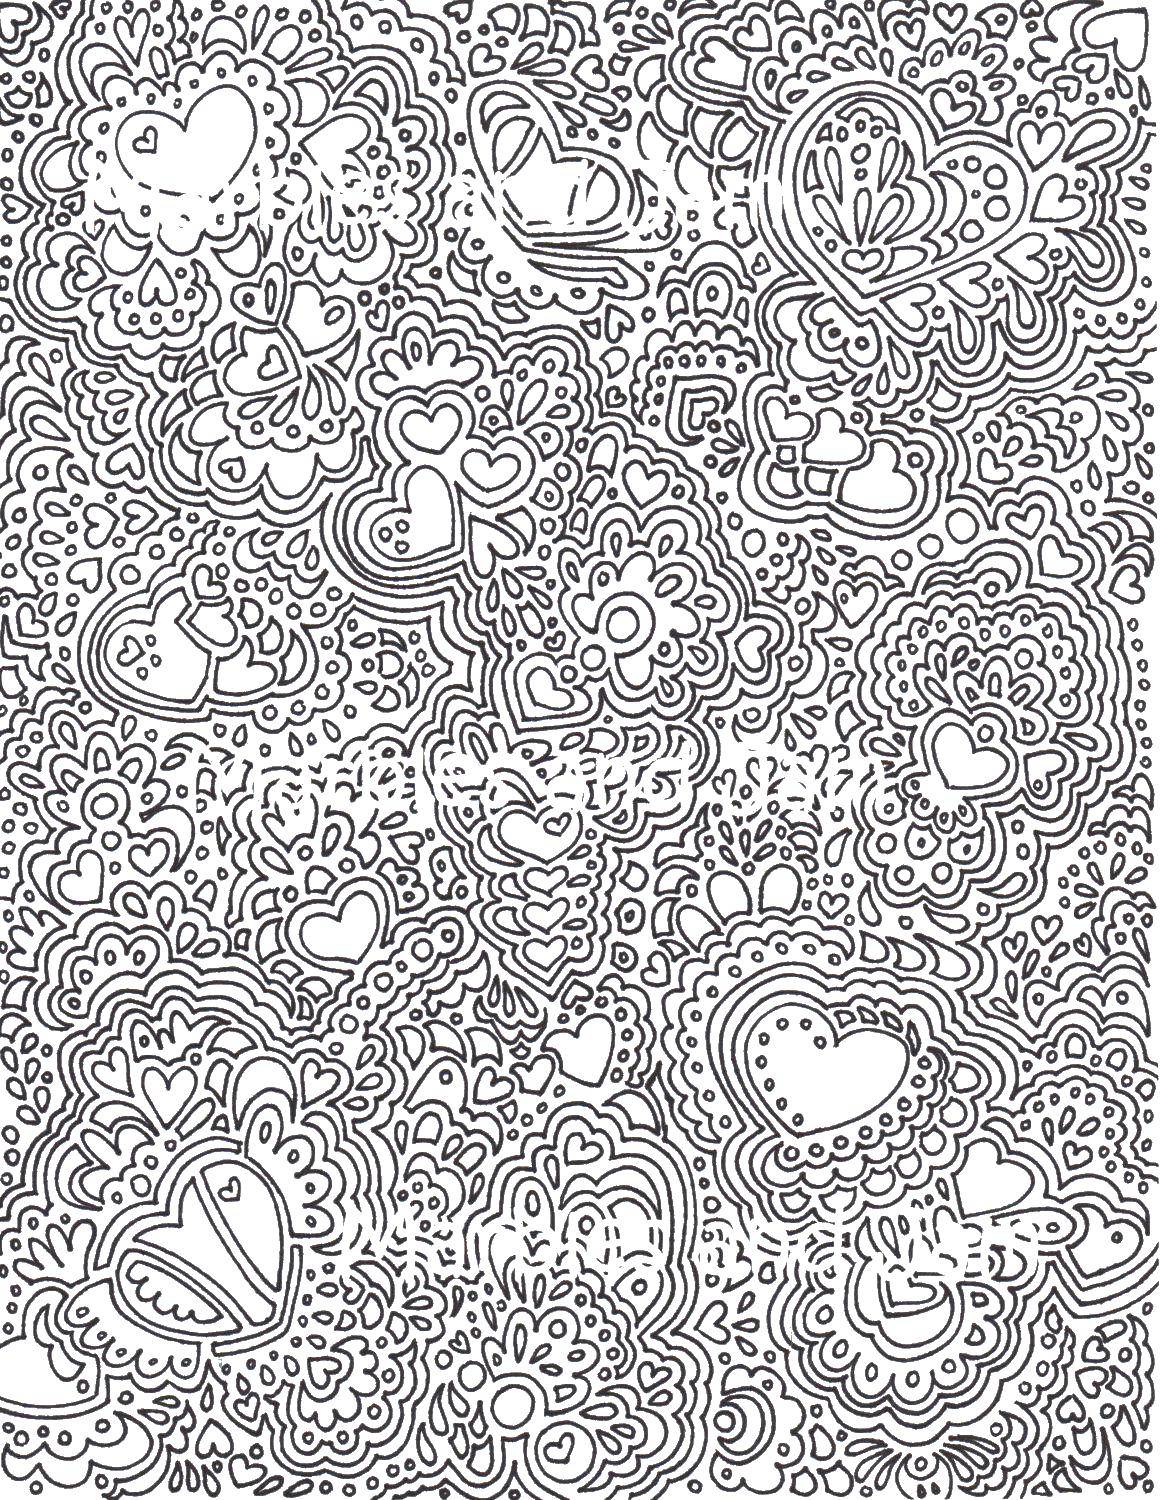 Coloring Flower patterns. Category coloring antistress. Tags:  patterns, flowers.